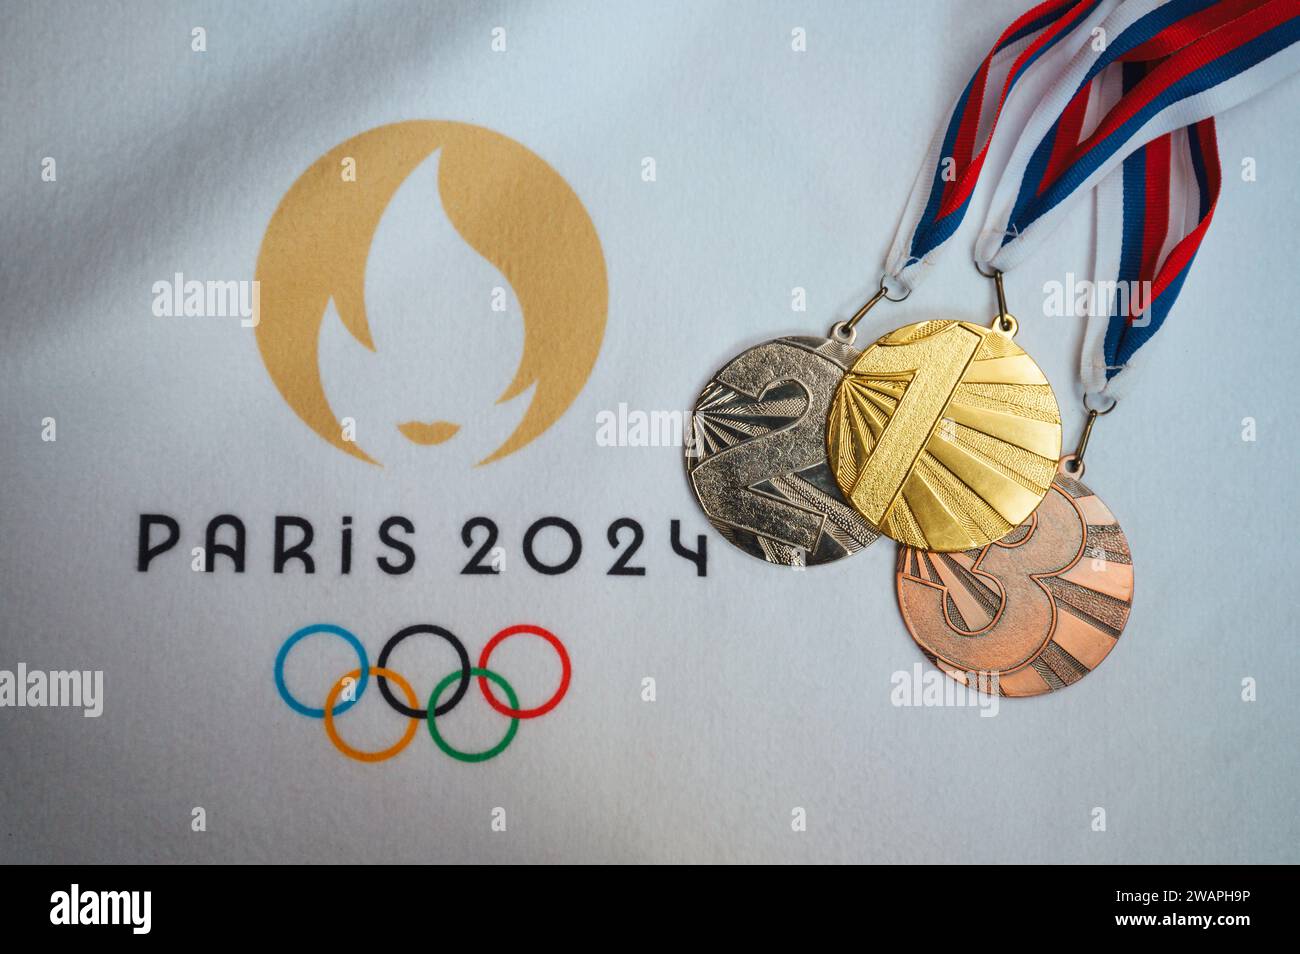 PARIS, FRANCE, JANUARY 4. 2024: A Glint of Victory: Gold, Silver, and Bronze Medals Arranged on White Blanket, Paris 2024 Olympics Logo Included Stock Photo